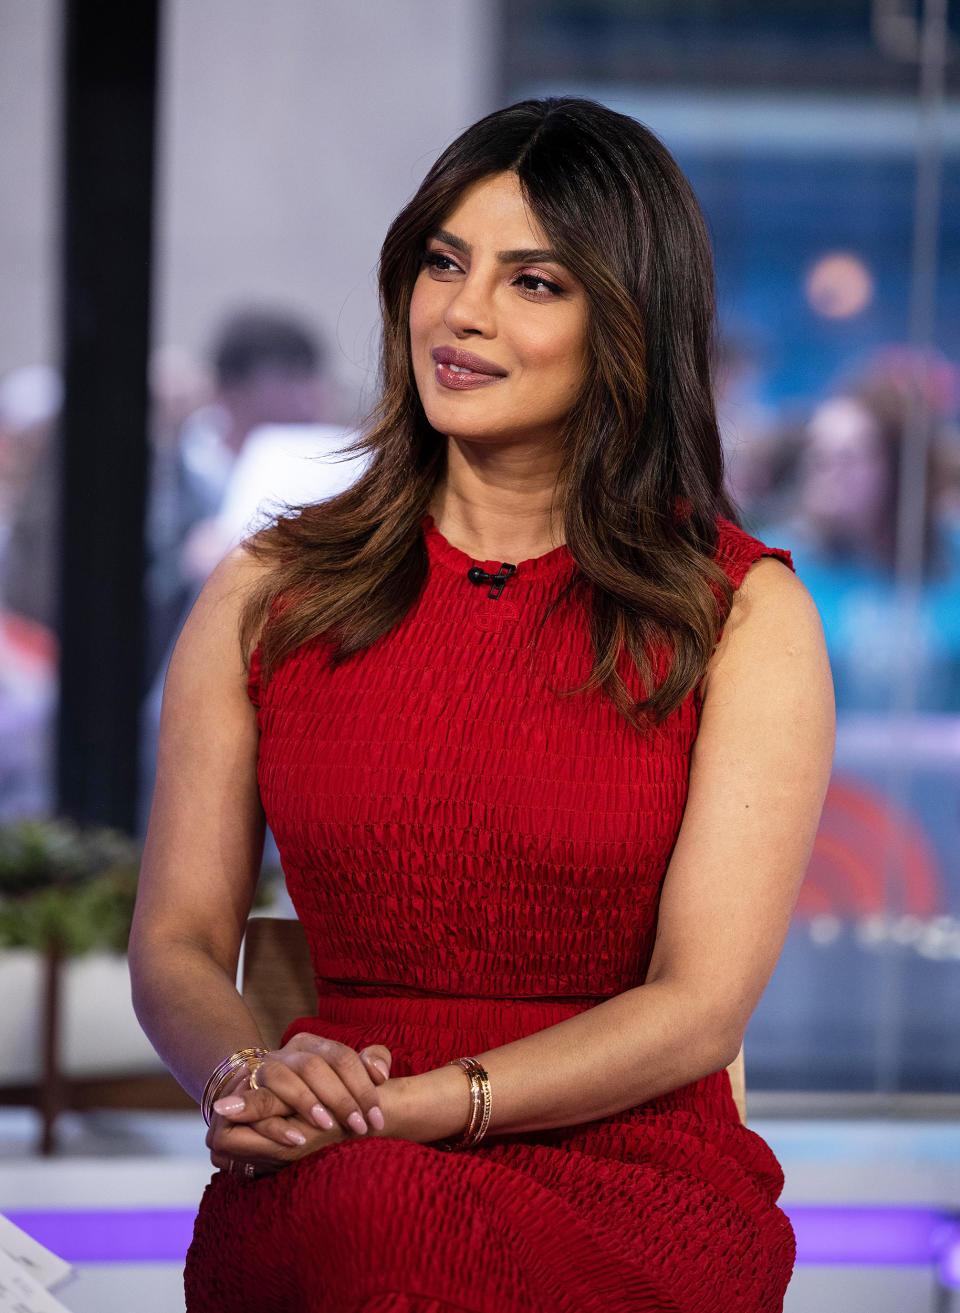 TODAY's next cover star Priyanka Chopra talks about her new TV show, 